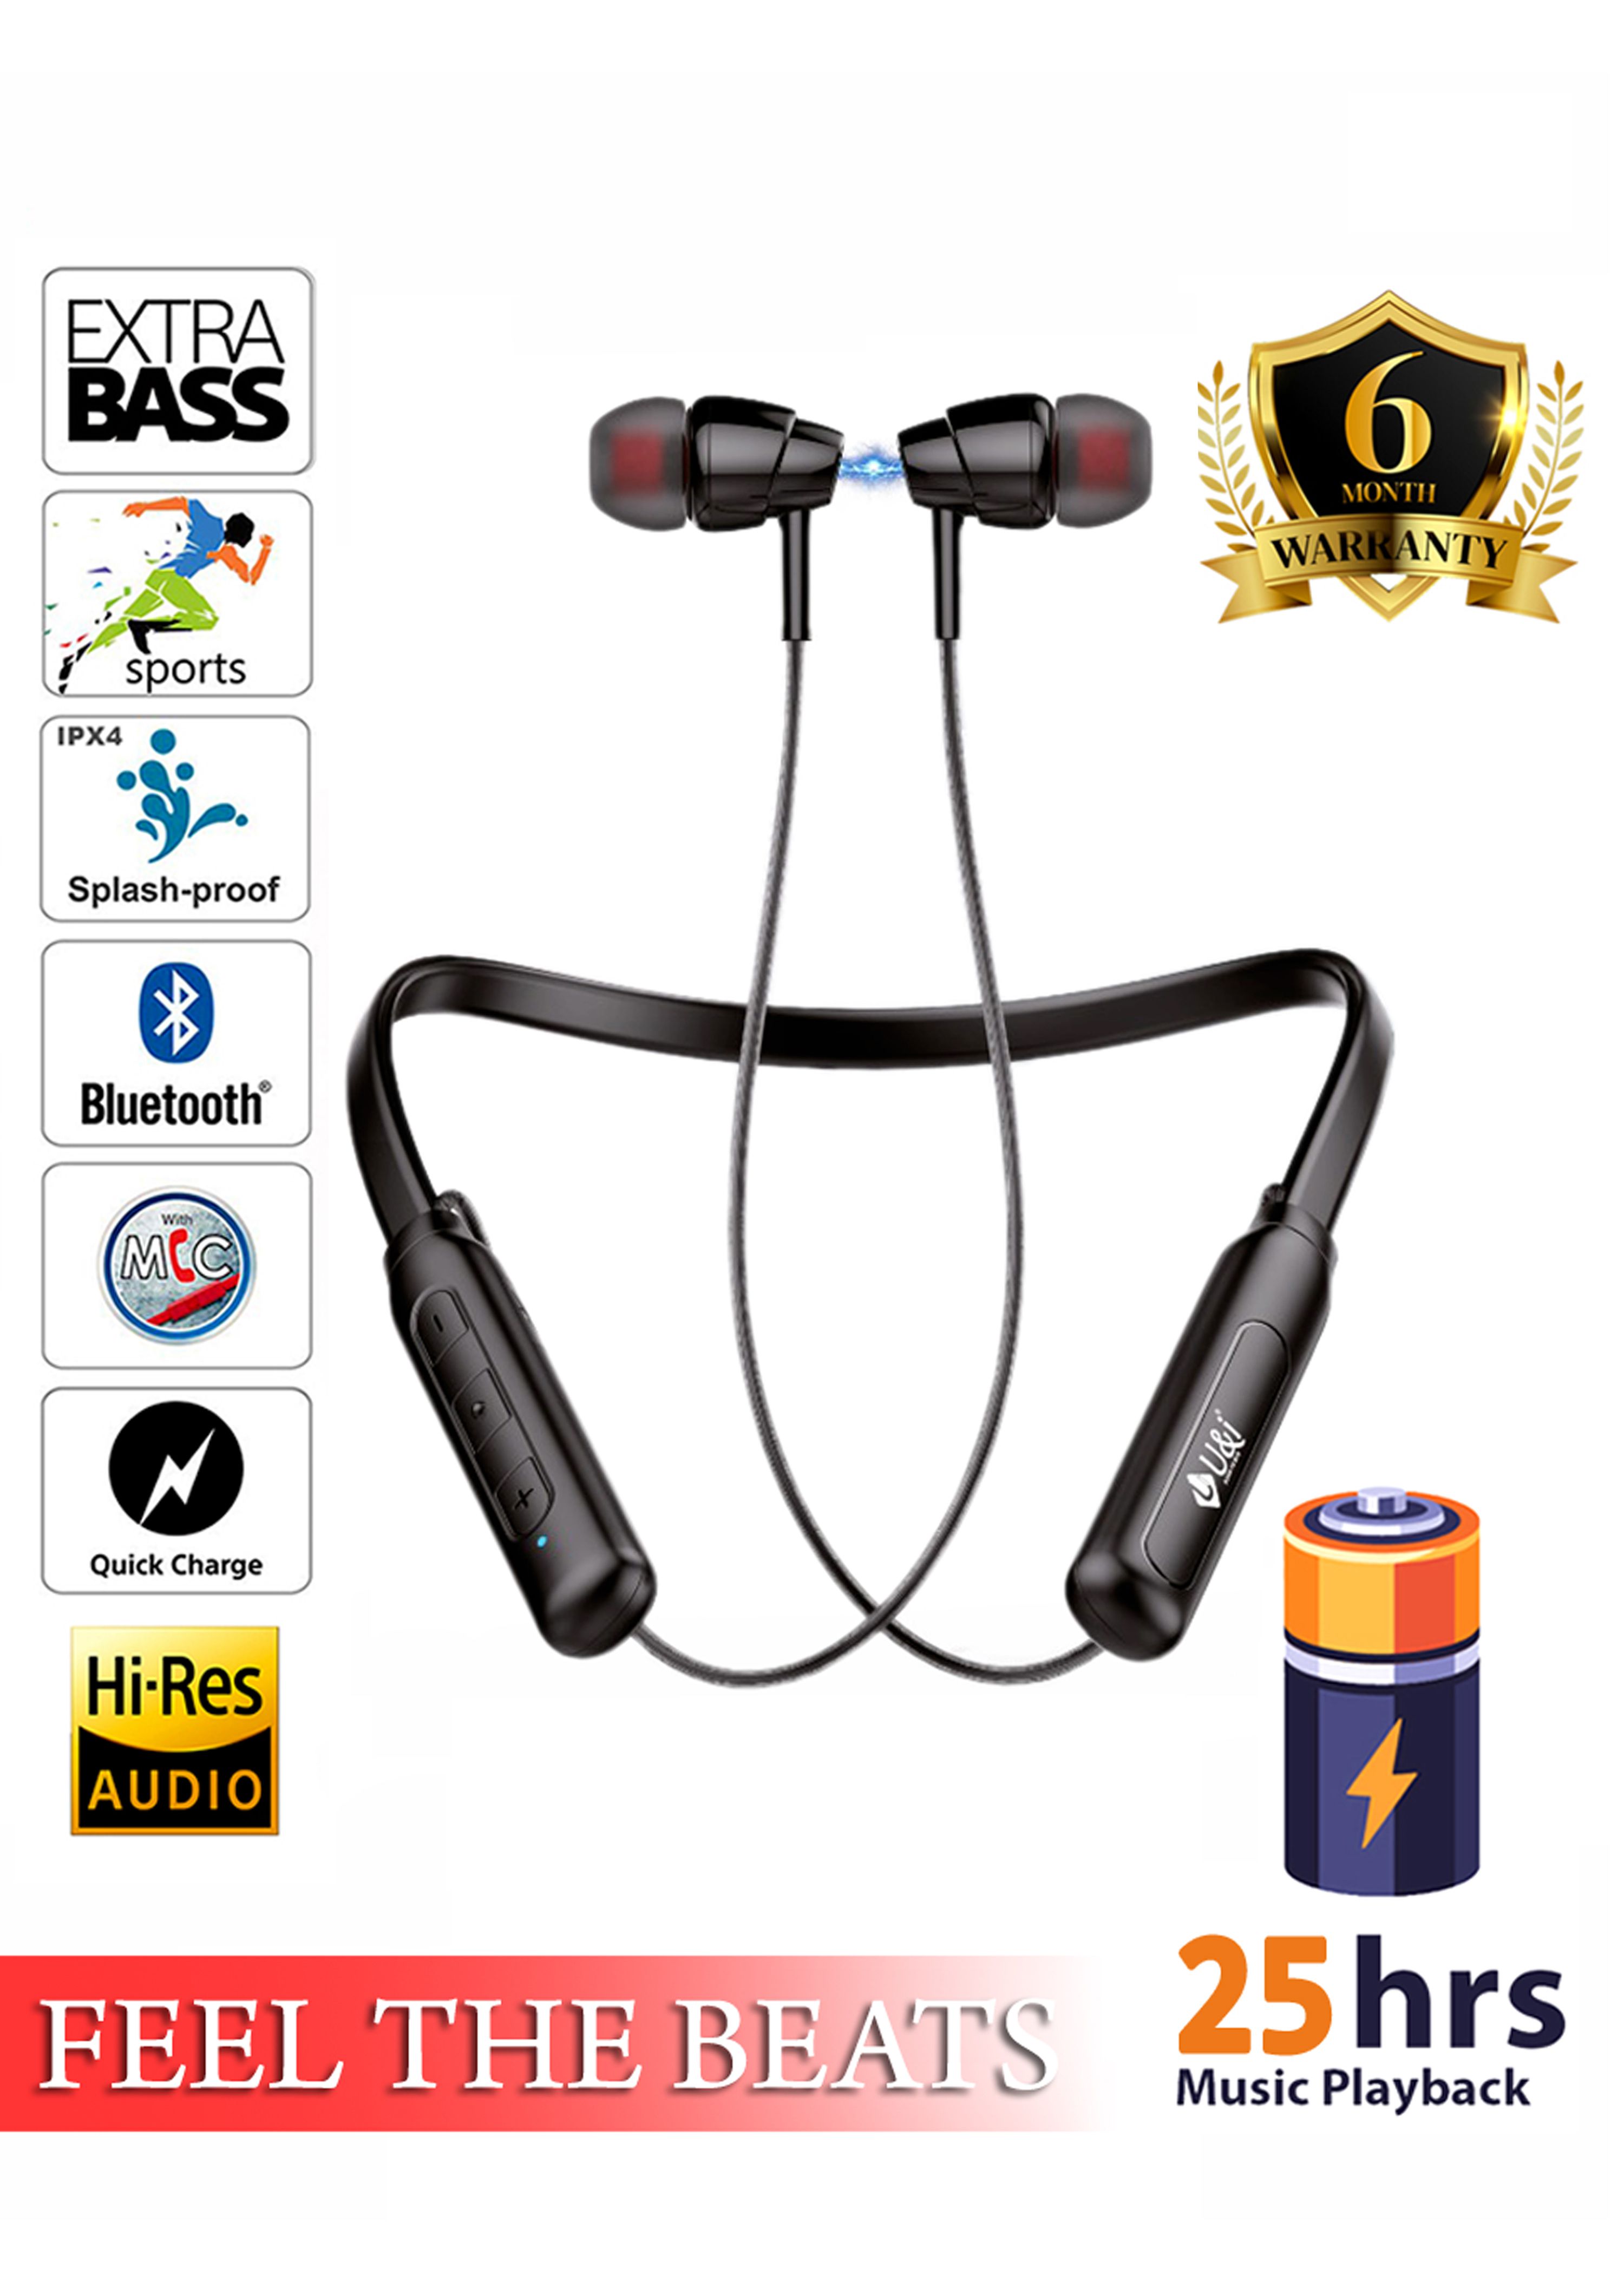 TUNE AUDIO U&I CRIME BASS 20 HOURS NON STOP MASSIVE MUSIC PLAYBACK IPX5 4D BASS SPORT Bluetooth headphone / Bluetooth EARPHONE, HEADPHONE,EARPHONE,NECKBAND FOR TUNE AUDIO